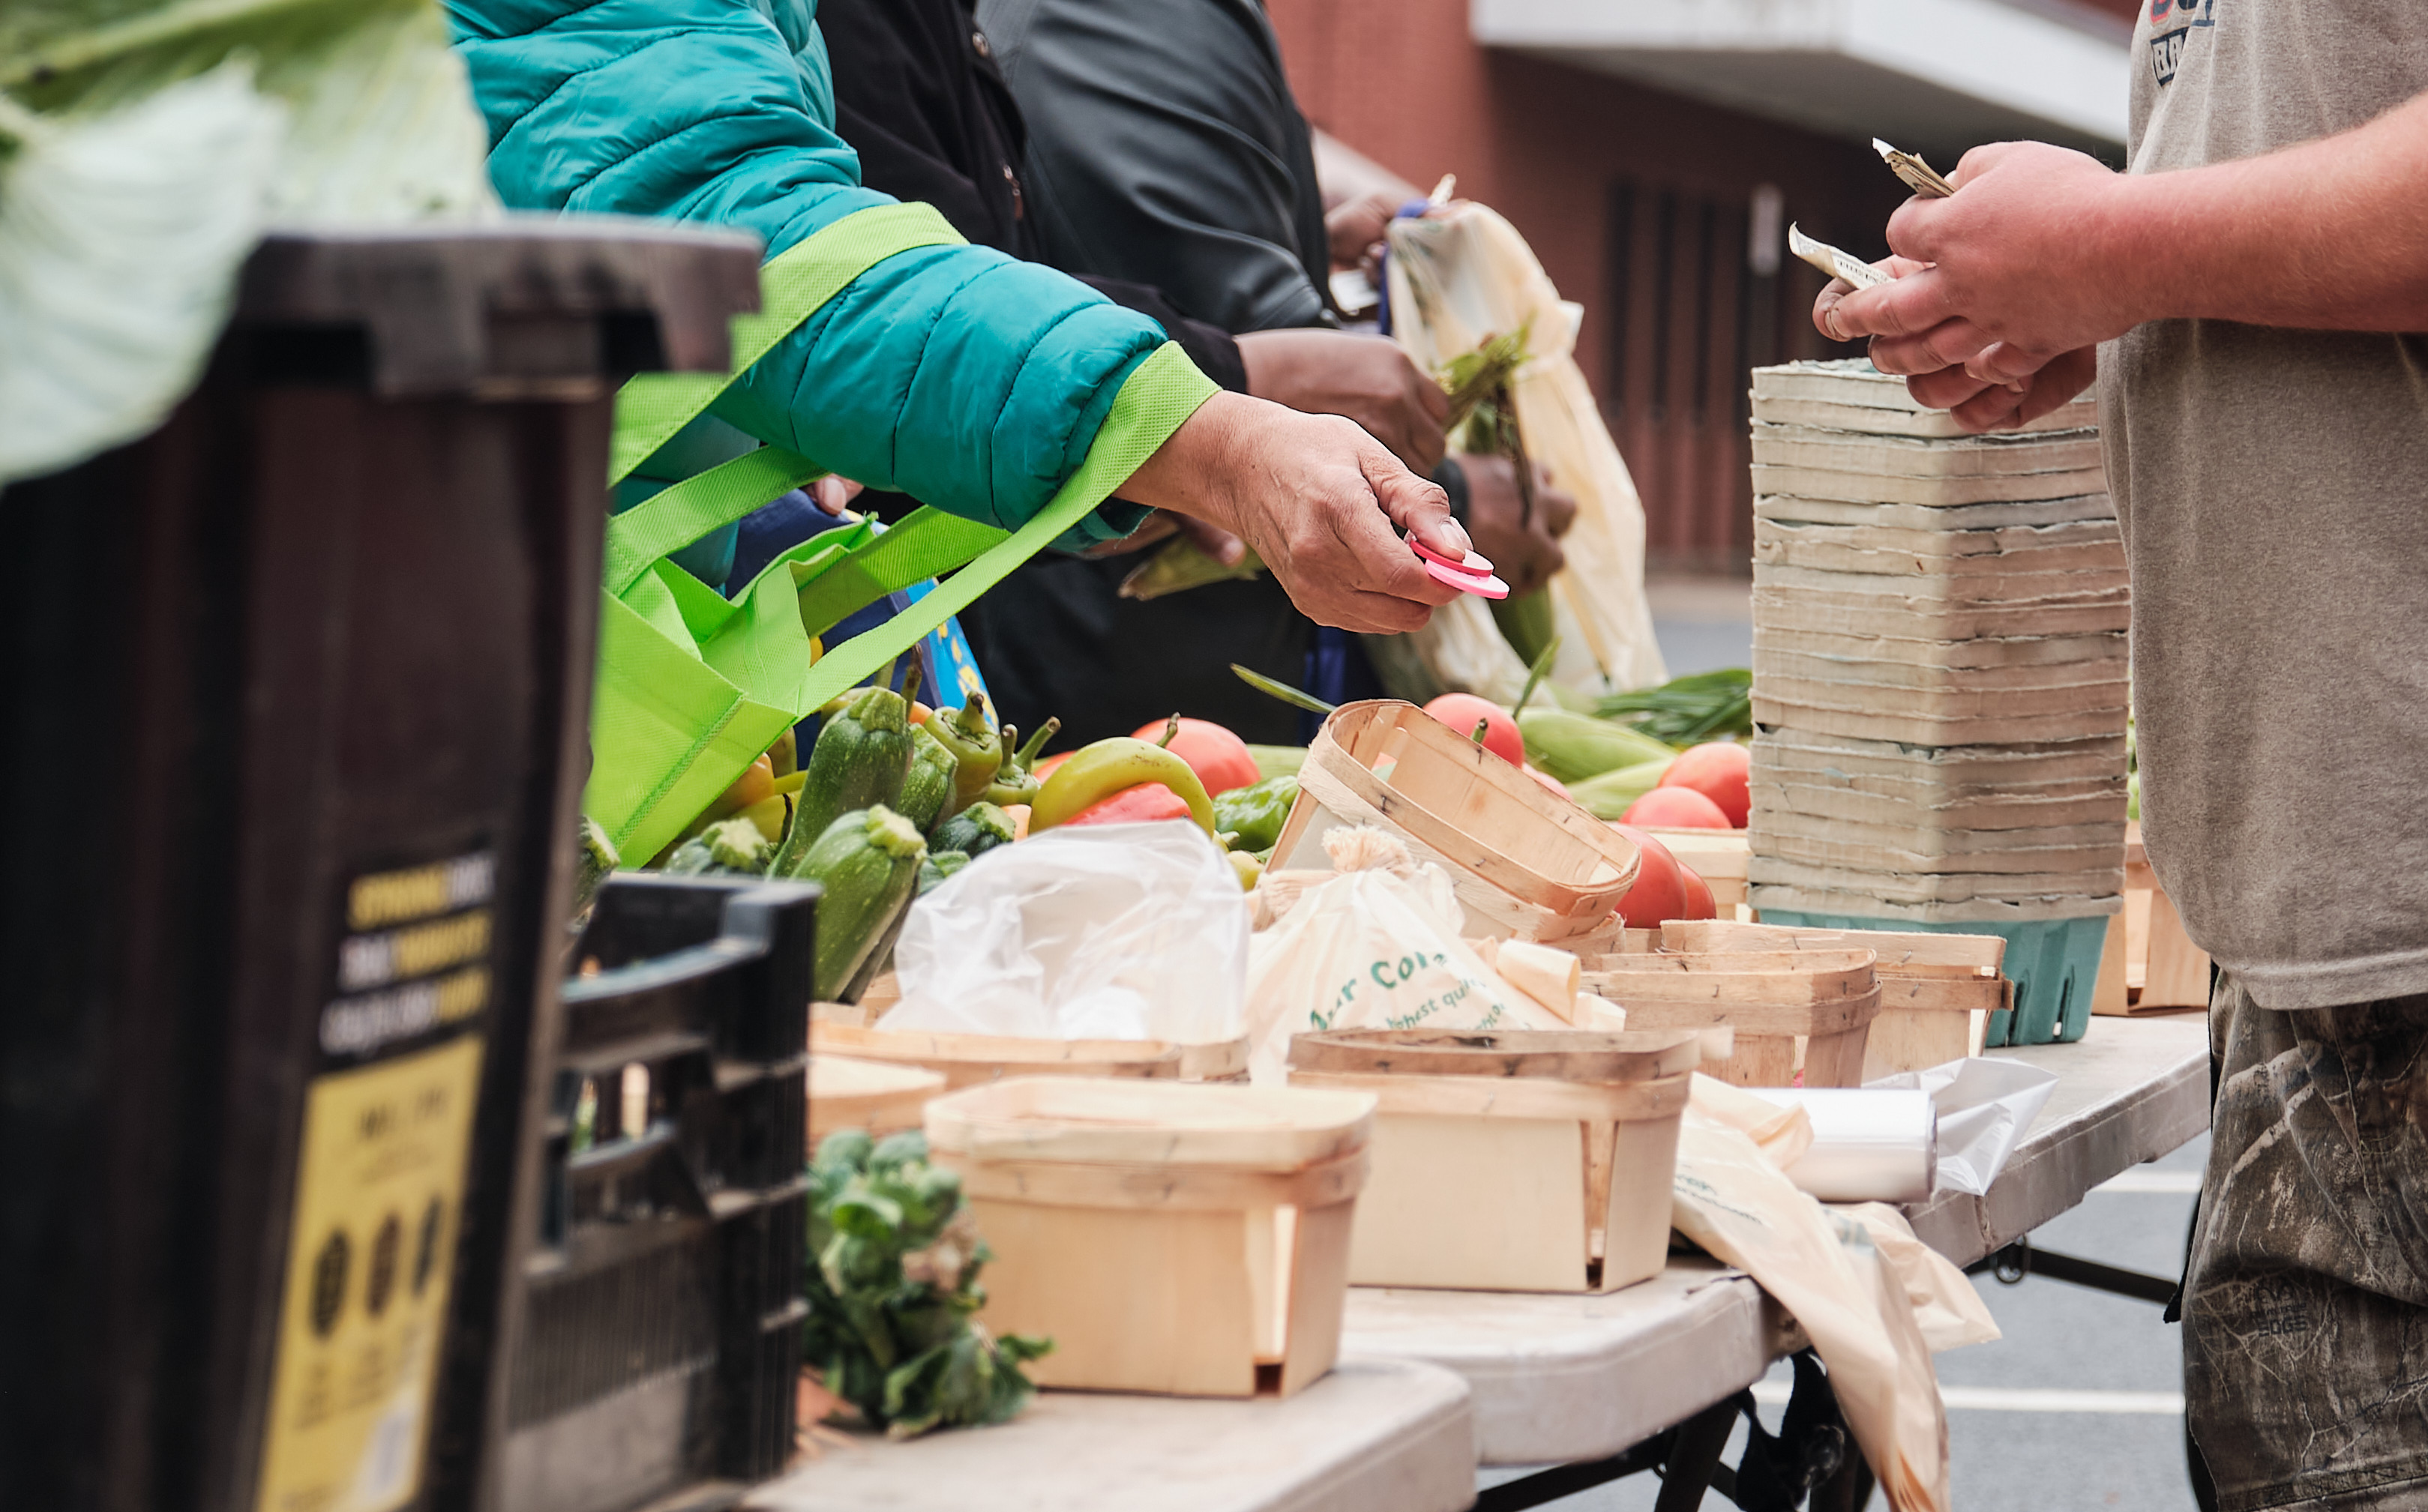 Image Description: close up shot of hands at a farmers market. A person in green sleeves is exchanging tokens with the farmer. Zucchini, peppers, and tomatoes can be seen in the background. IMAGE CREDIT: Joey Abad.